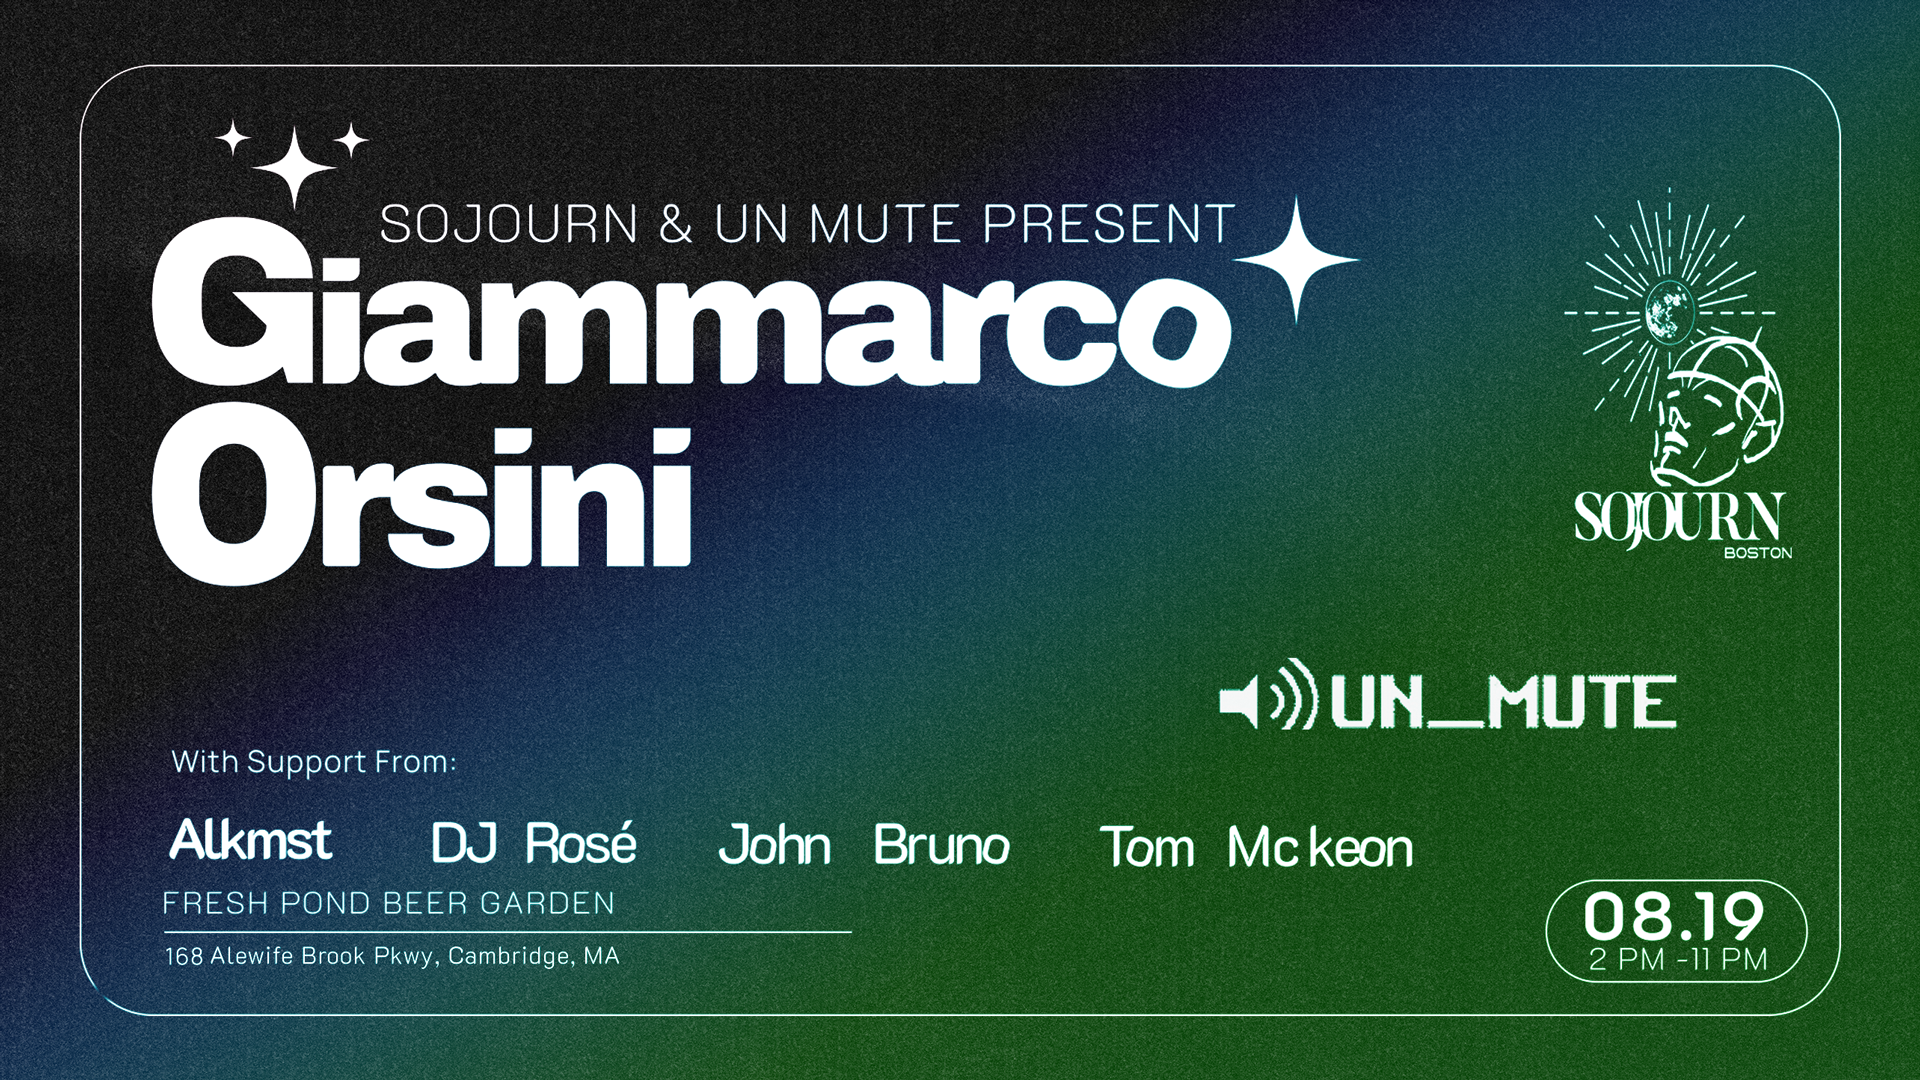 Un_mute x Sojourn All Day with Giammarco Orsini - Open Air - Página trasera